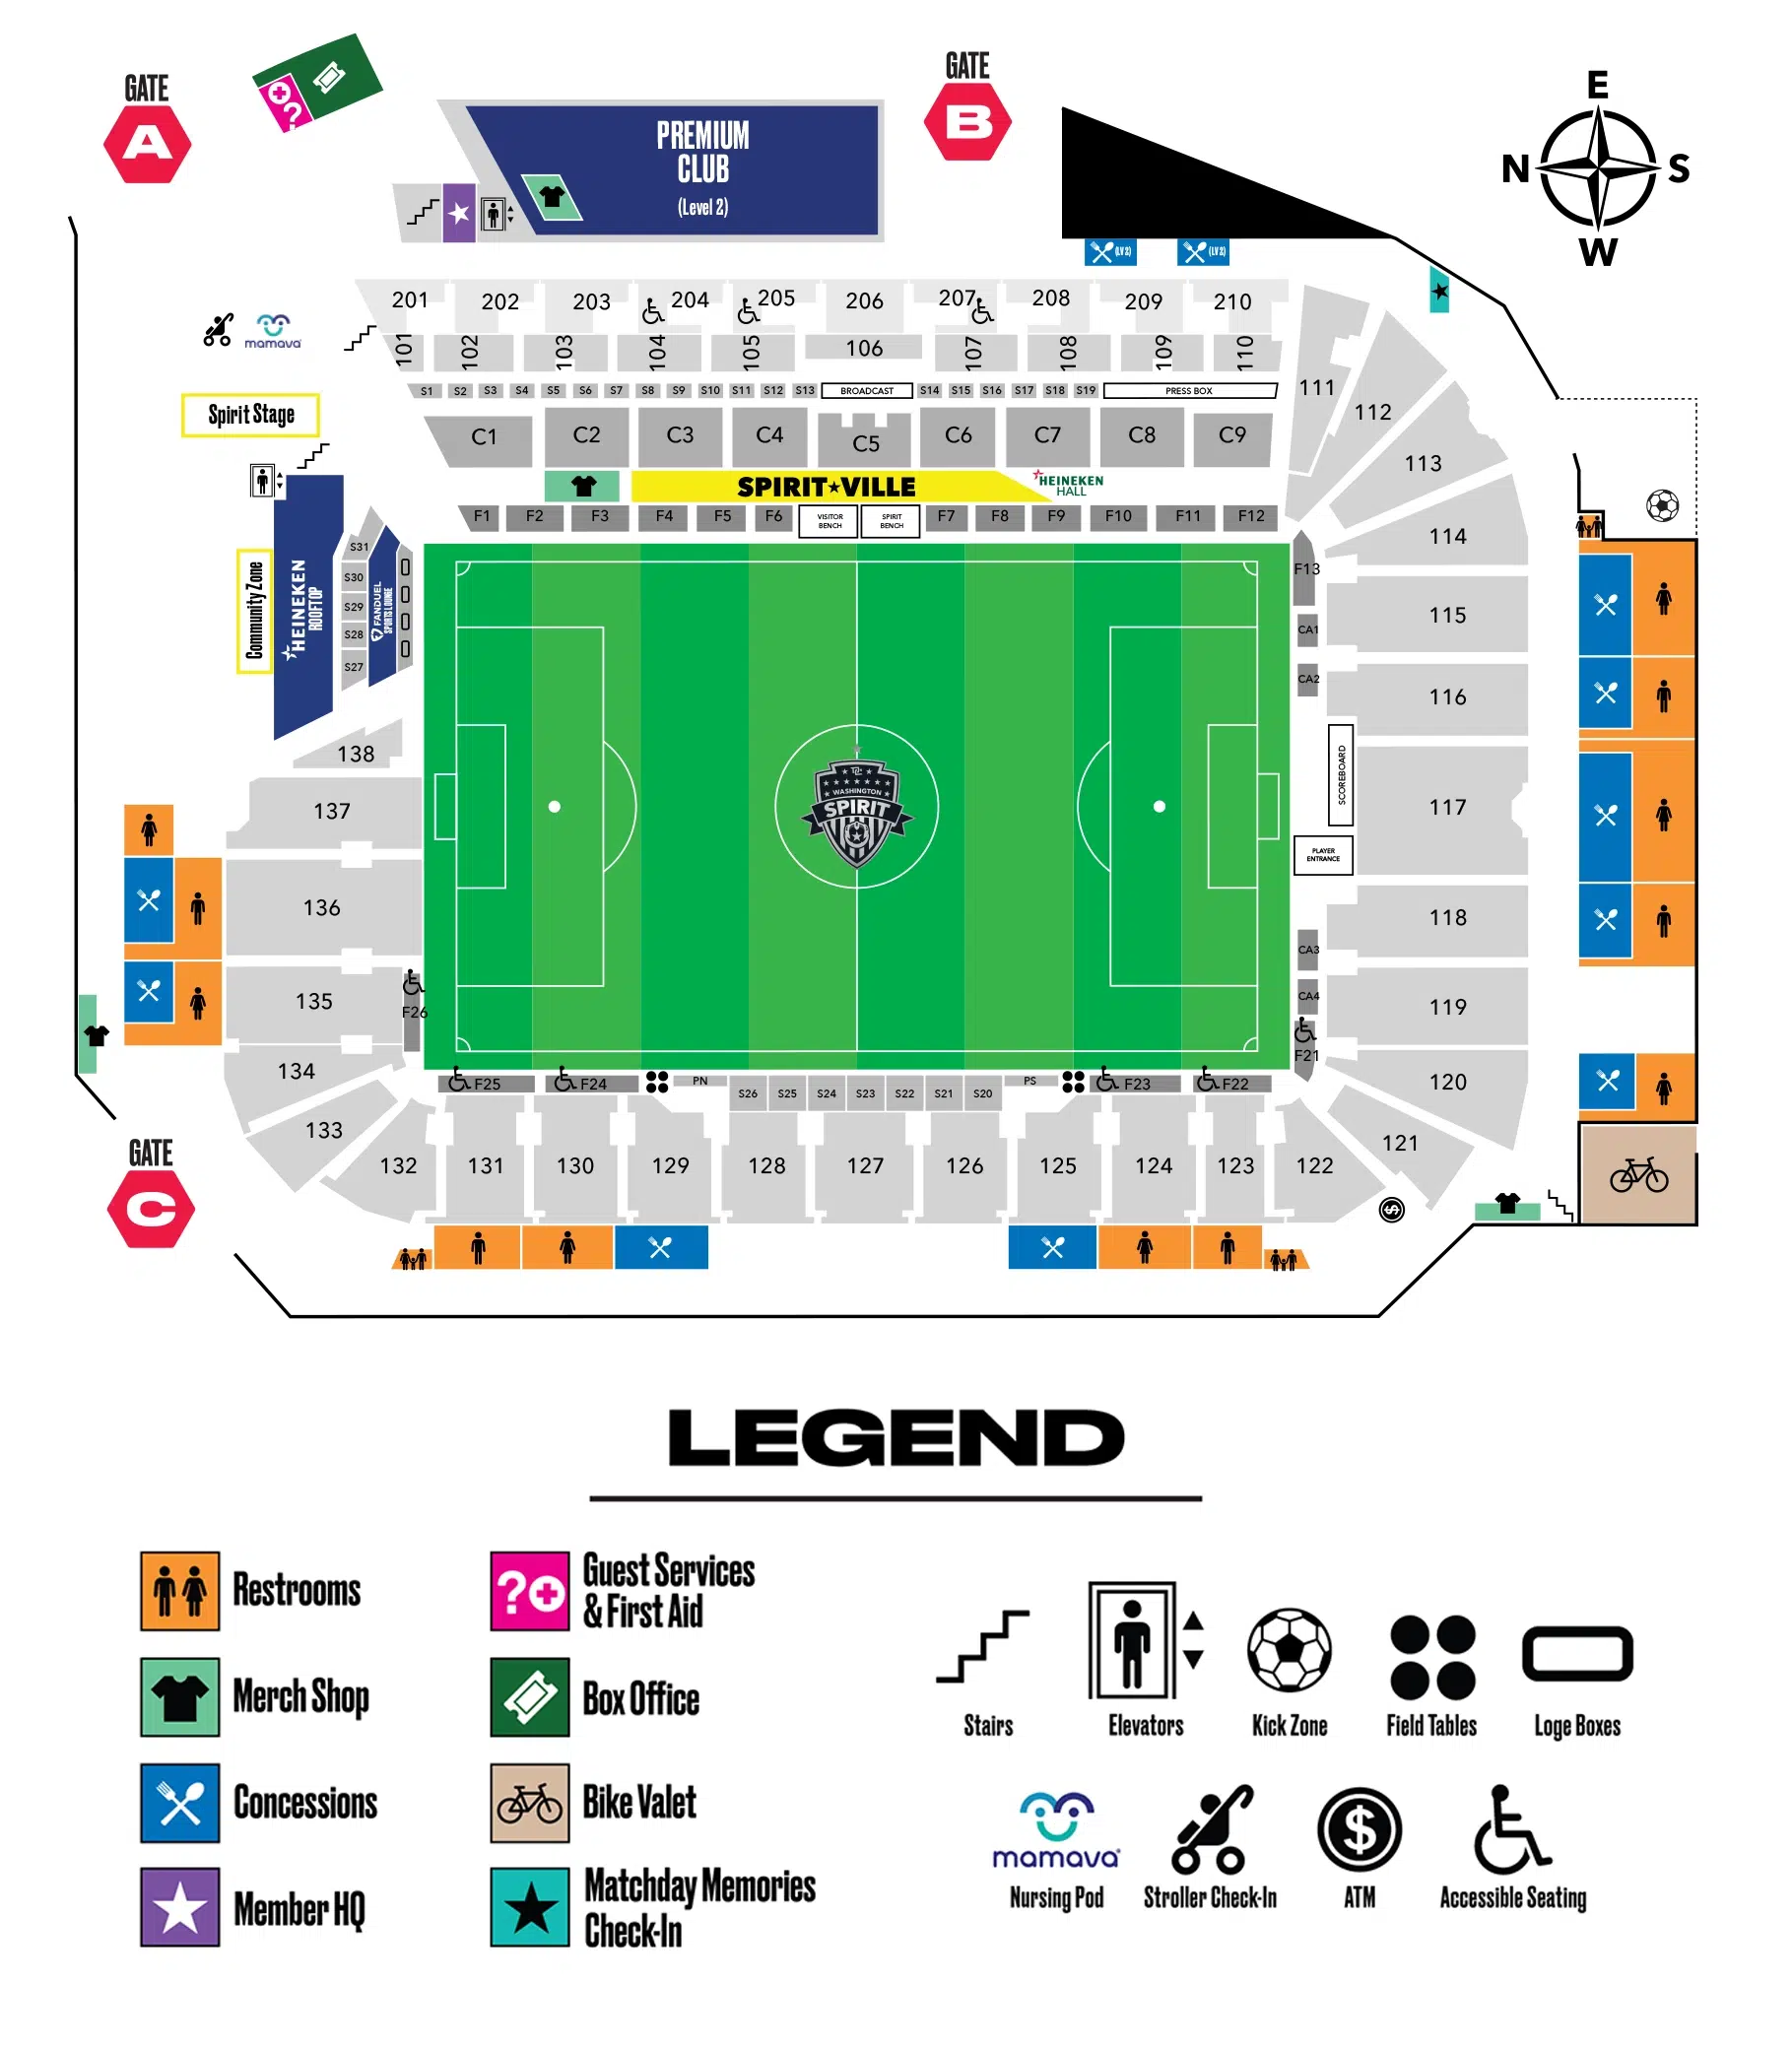 A map of Audi Field detailing section numbers, bathroom locations, and merch stands.